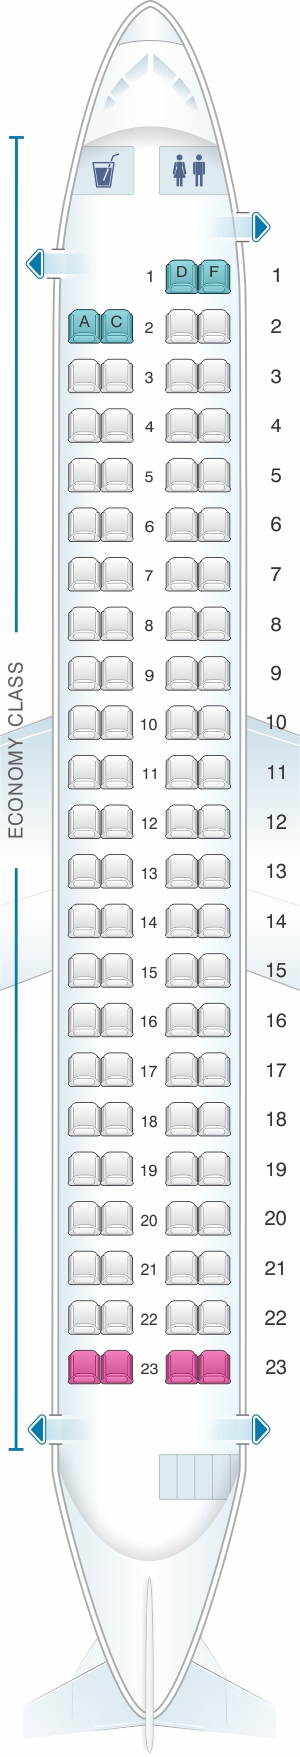 Seat map for SpiceJet Bombardier Q400 config.2